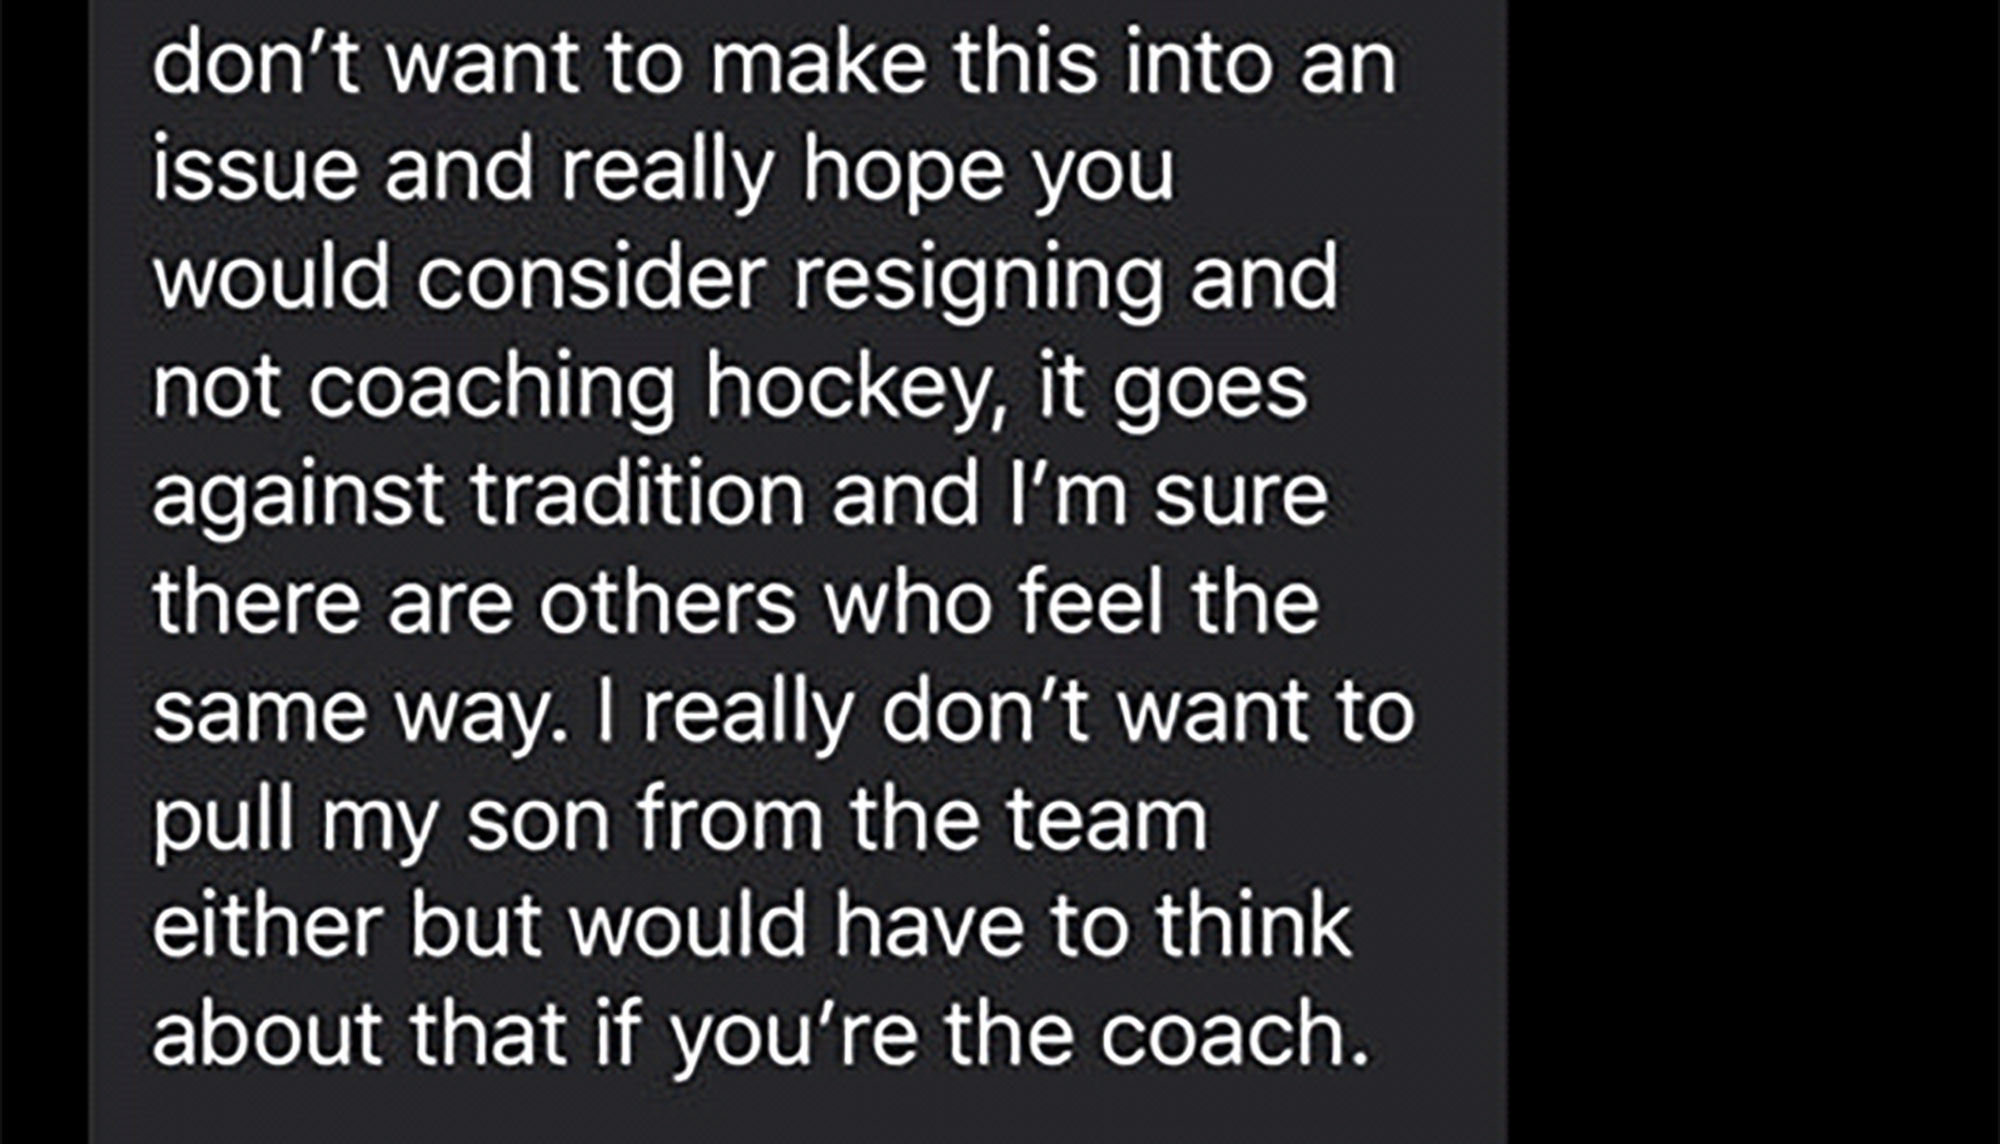 lyrics - don't want to make this into an issue and really hope you would consider resigning and not coaching hockey, it goes against tradition and I'm sure there are others who feel the same way. I really don't want to pull my son from the team either but